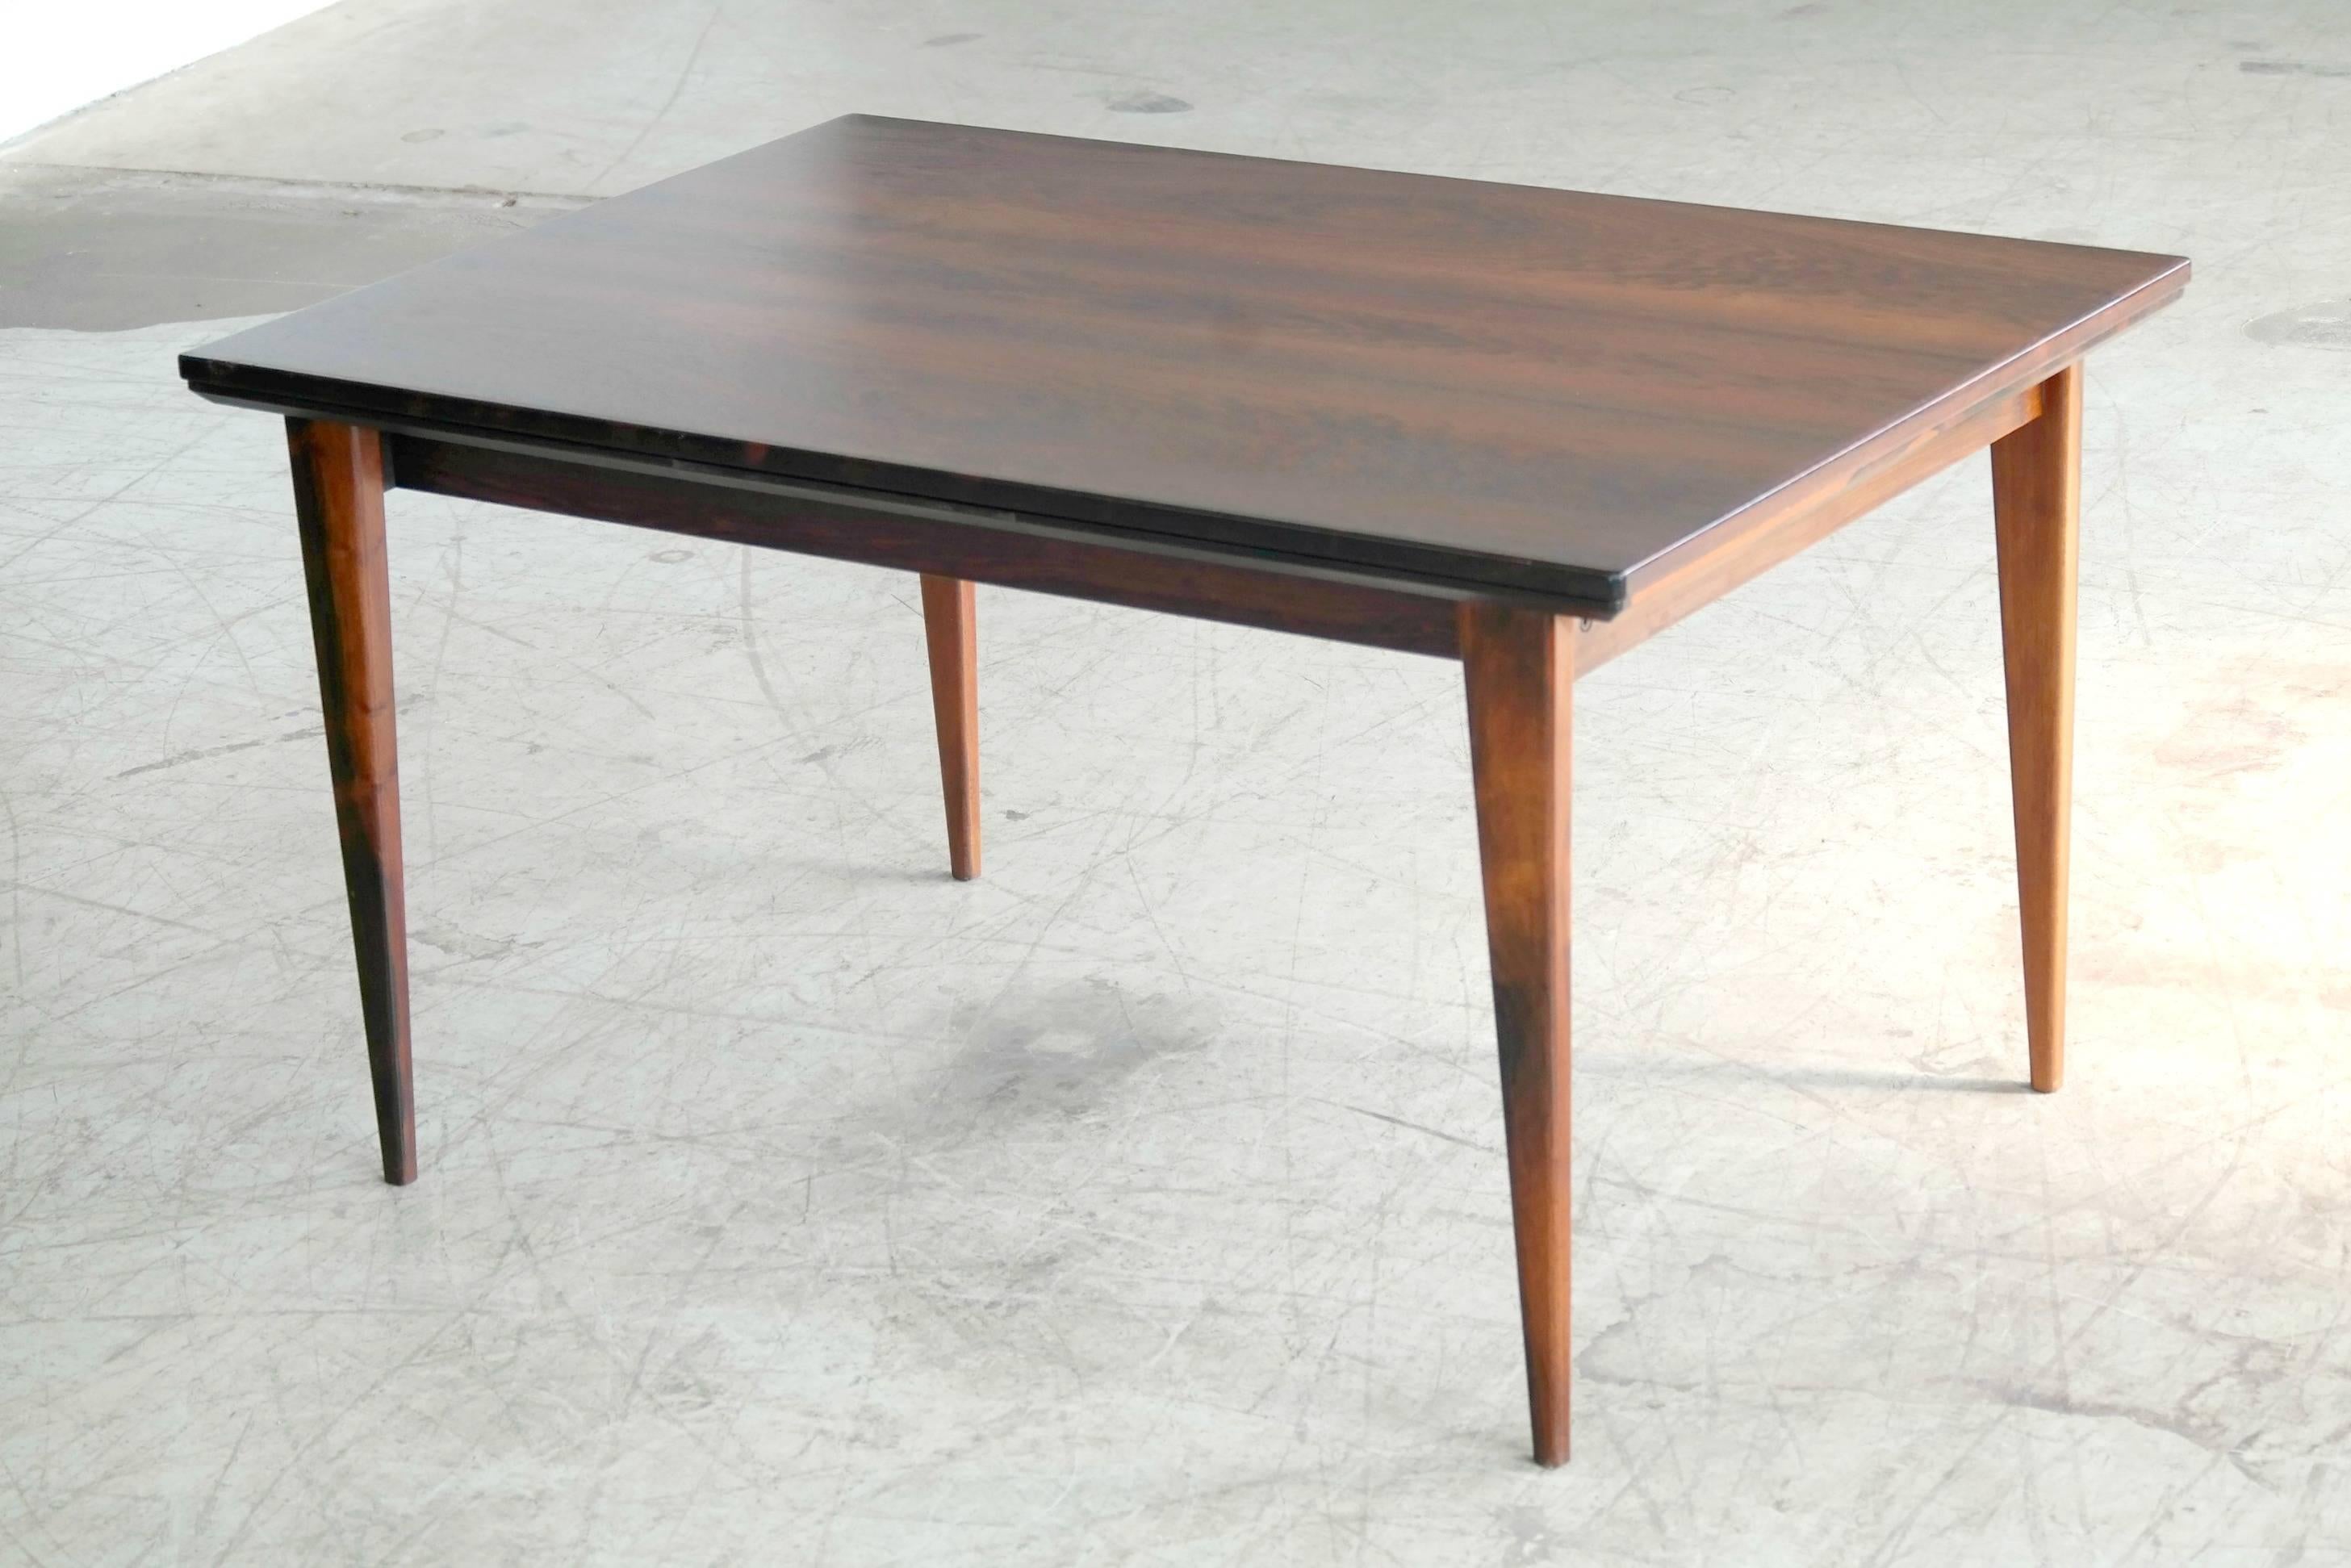 An exquisite rosewood dining table with stunning grain and two extension leaves made by Gudme Mobelfabrik, Denmark in the 1960's. 

It measures 54.5" long without the leafs. There are two leafs stored inside the table. With both of them